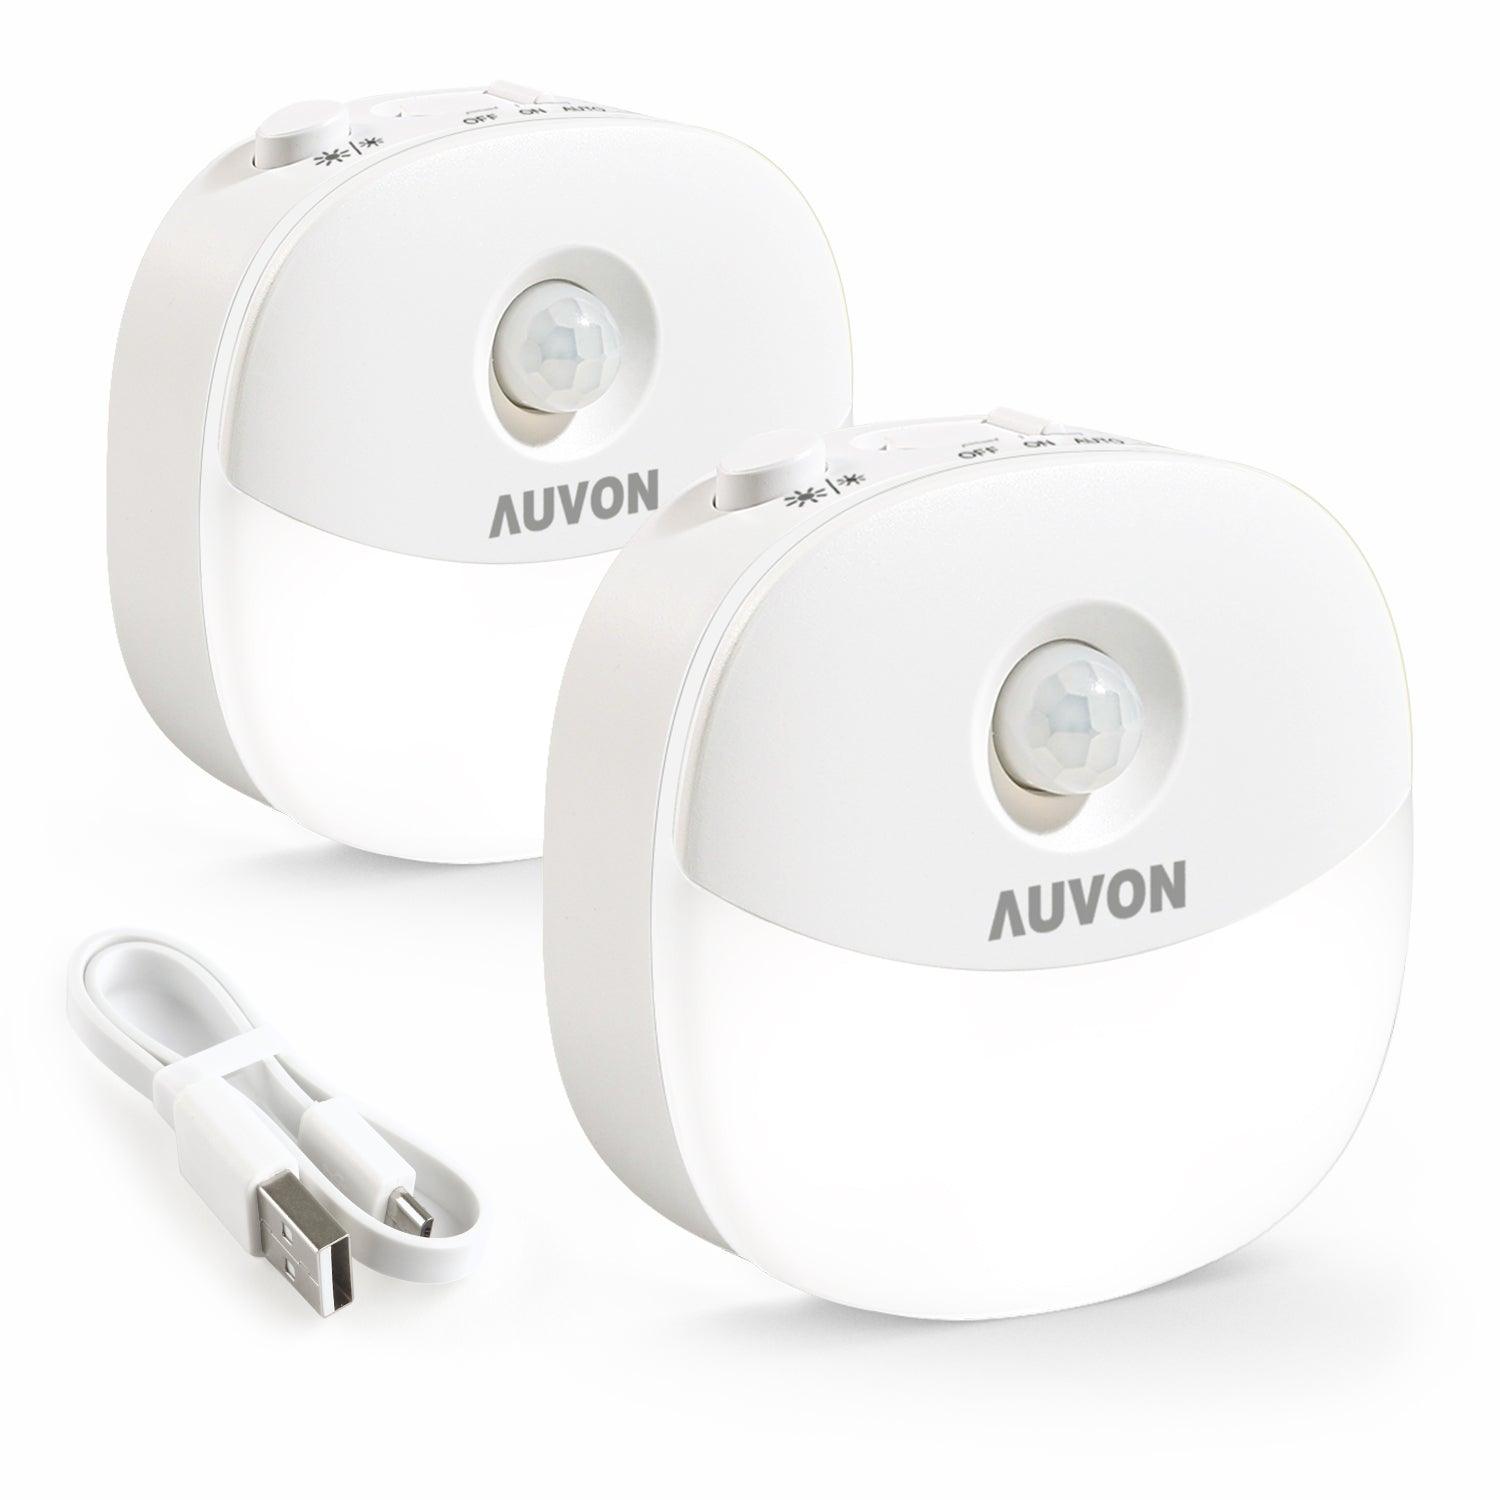 https://auvonhealth.com/cdn/shop/files/auvon-rechargeable-mini-motion-sensor-night-light-warm-white-led-stick-on-closet-light-with-dusk-to-dawn-sensor-adjustable-brightness-for-wall-stairs-cabinet-hallway-2-pack-auvon-7.jpg?v=1686019855